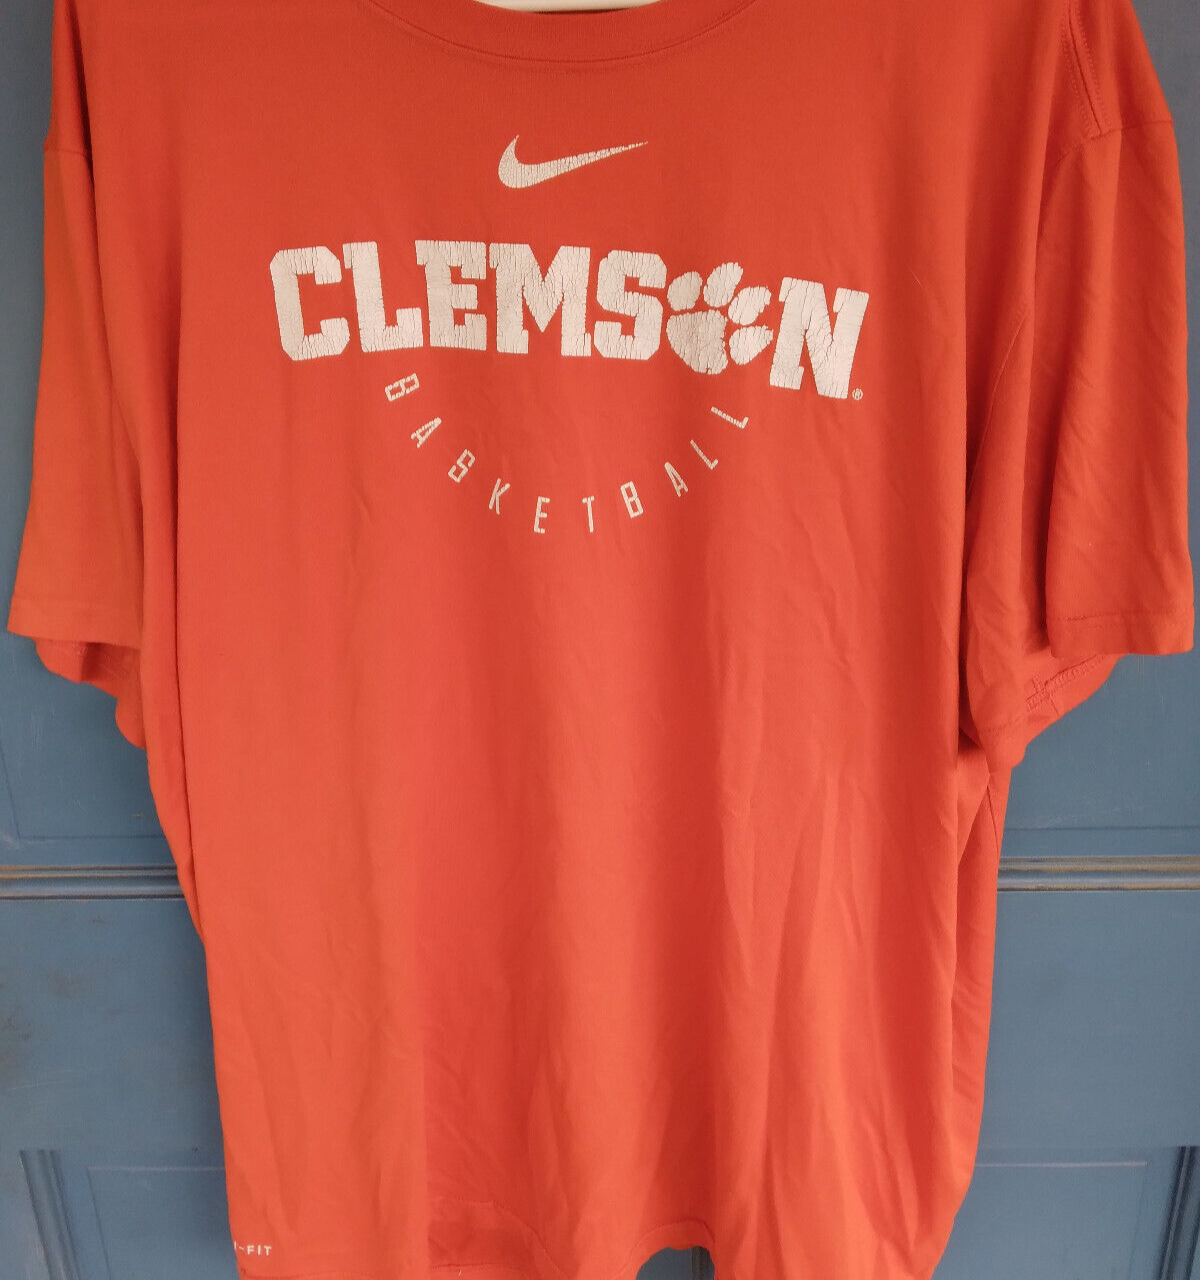 Primary image for Clemson Basketball T-Shirt (With Free Shipping)